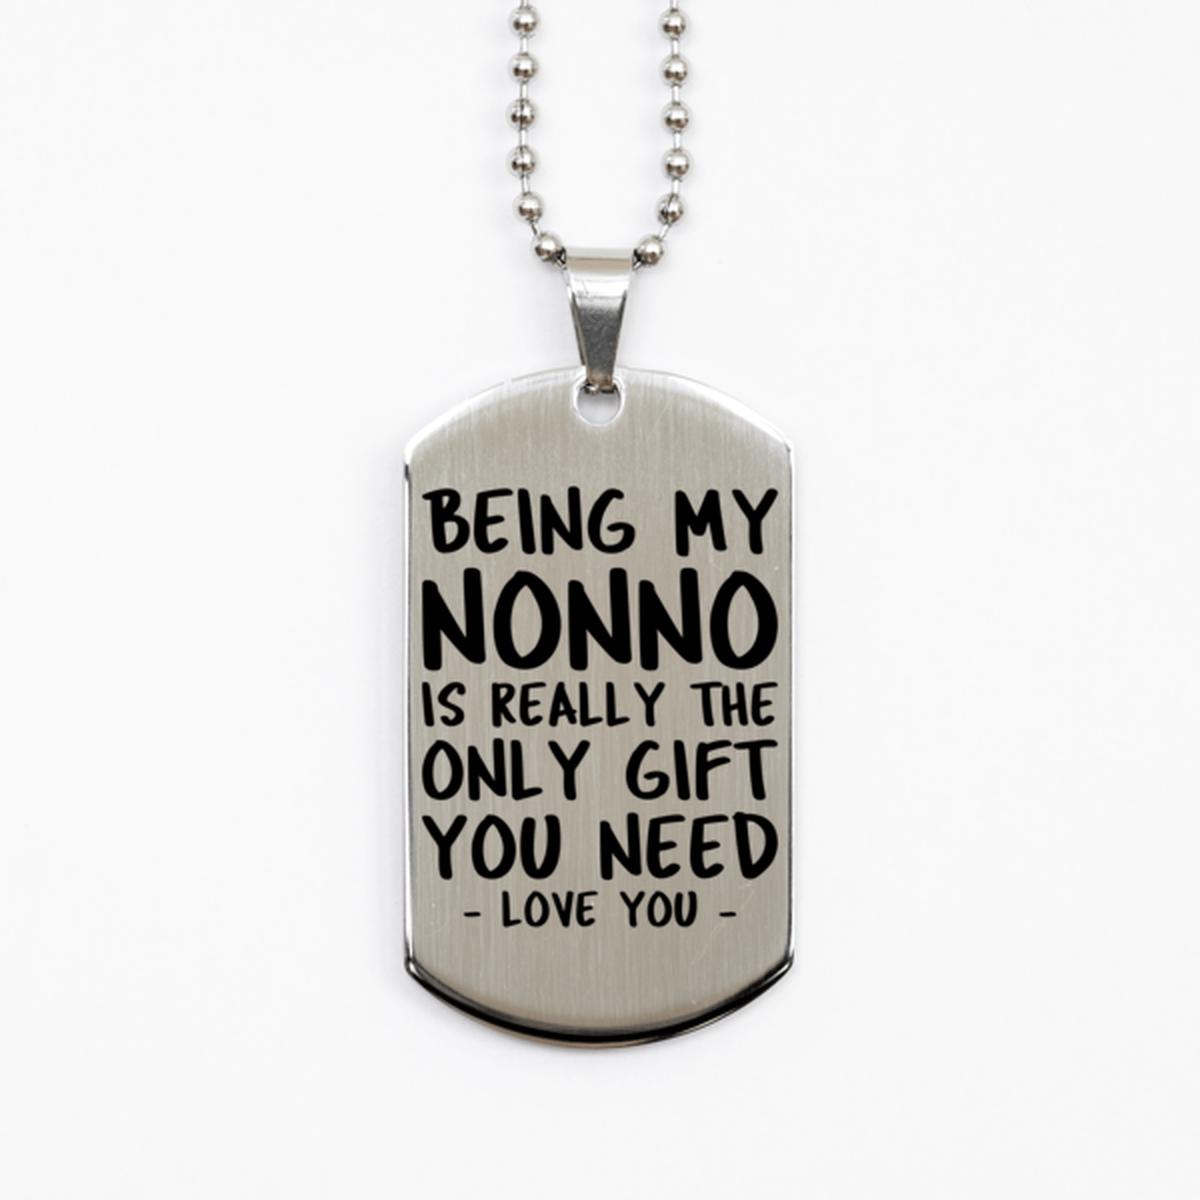 Funny Nonno Silver Dog Tag Necklace, Being My Nonno Is Really the Only Gift You Need, Best Birthday Gifts for Nonno